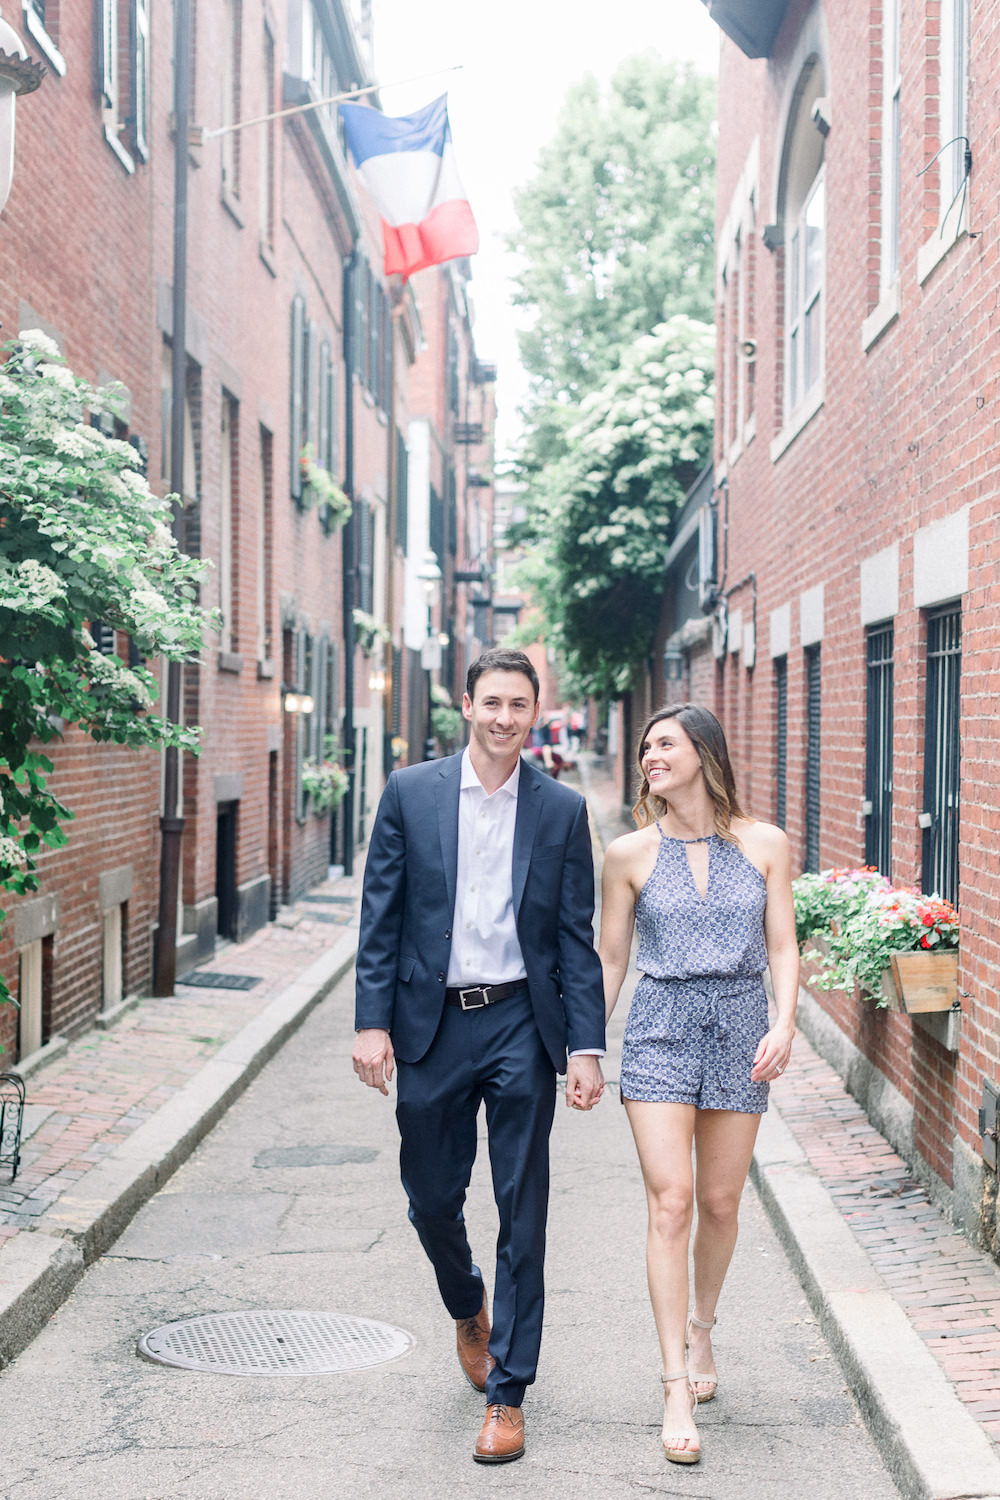 Beacon Hill Engagement Session. Photo: By Halie